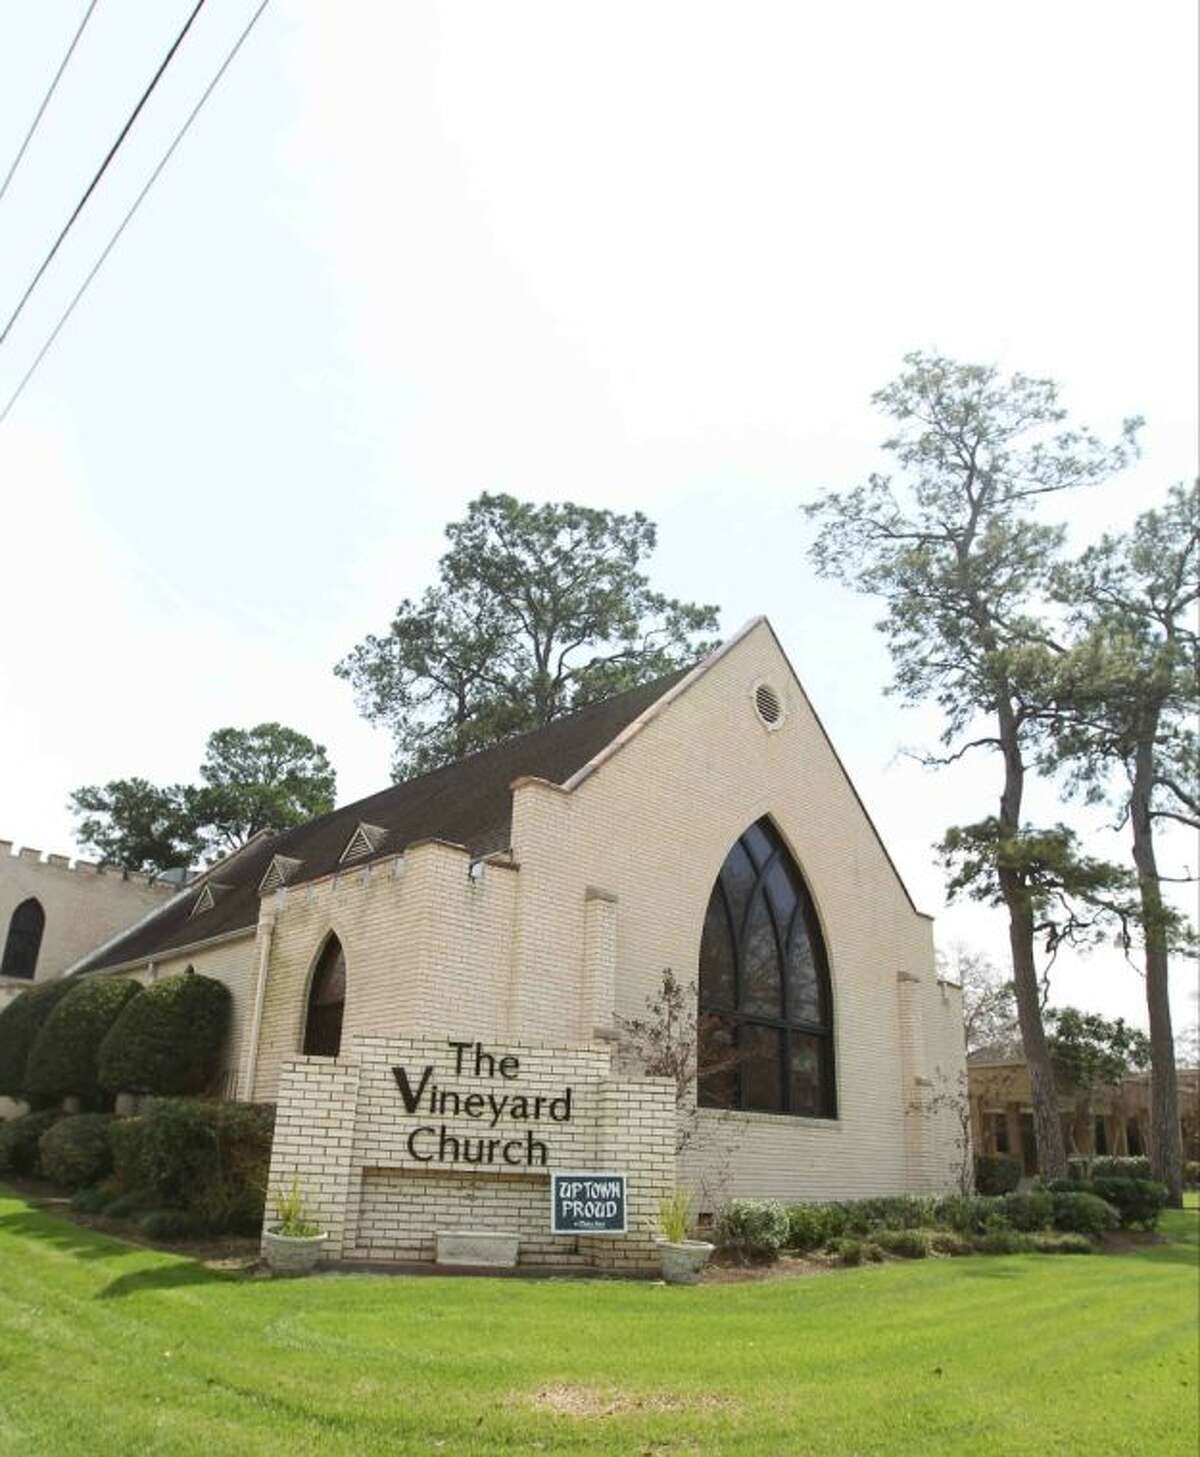 The owner of the original building, The First Presbyterian Church of Conroe, sold the property in 2001, but the focus on spirituality did not change when the structure became home to the nondenominational Vineyard Church which now resides there. The below photo is circa 1955.